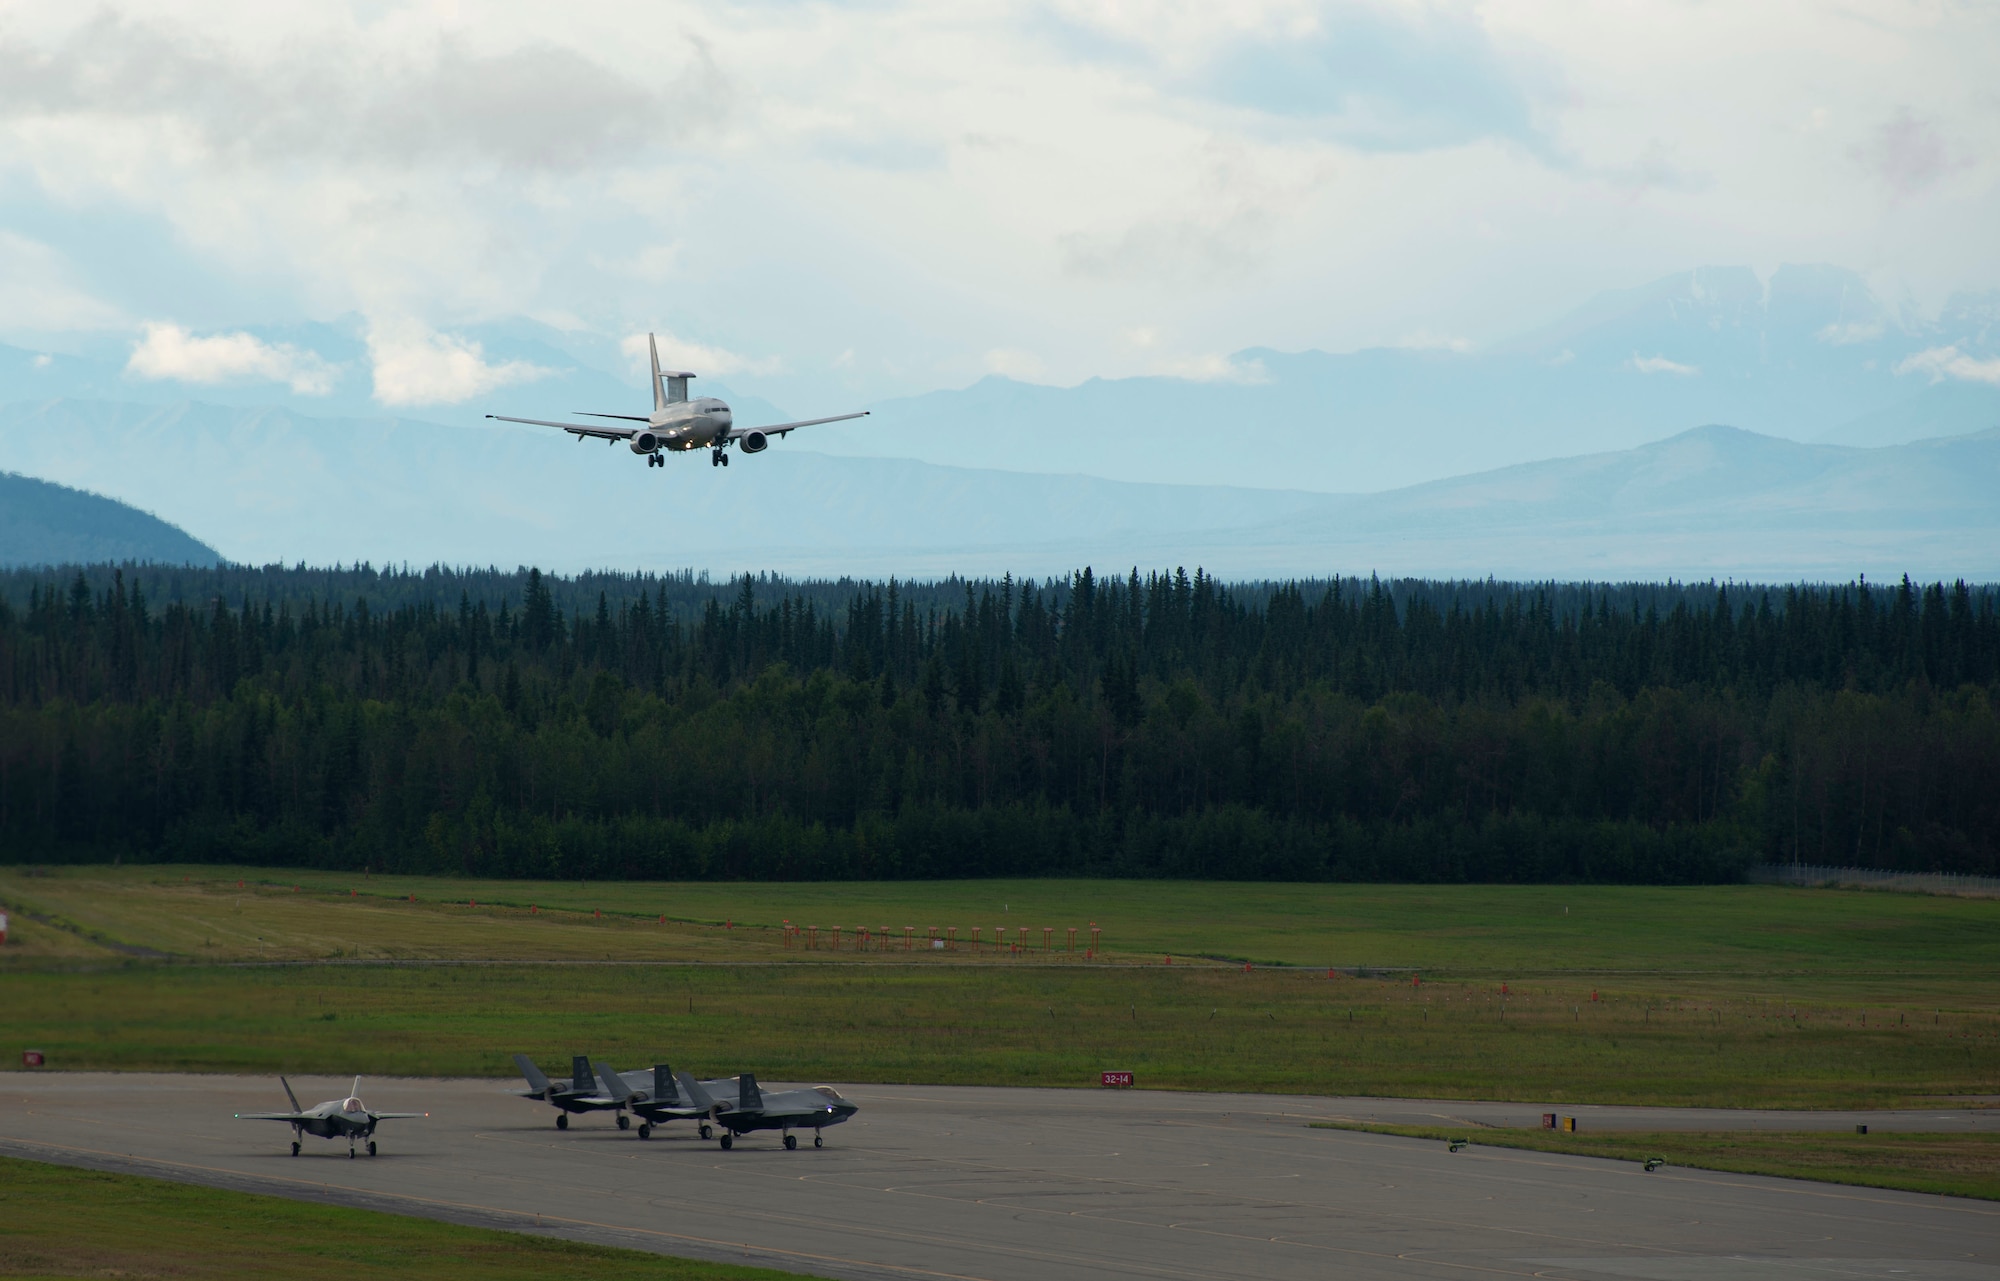 A Royal Australian Air Force E-7A Wedgetail prepares to land while U.S. Air Force F-35A Lighting IIs prepare to take off on Eielson Air Force Base, Alaska, Aug. 11, 2021. RAAF personnel last visited Alaska in 2019 to participate in RF-A 19-3, before the 354th Fighter Wing accepted its first F-35As. This time the Australians brought their own F-35As as well as EA-18G Growlers and an E-7A Wedgetail to exercise air-to-air combat as well as cyber and intelligence capabilities.(U.S. Air Force photo by Senior Airman Beaux Hebert)